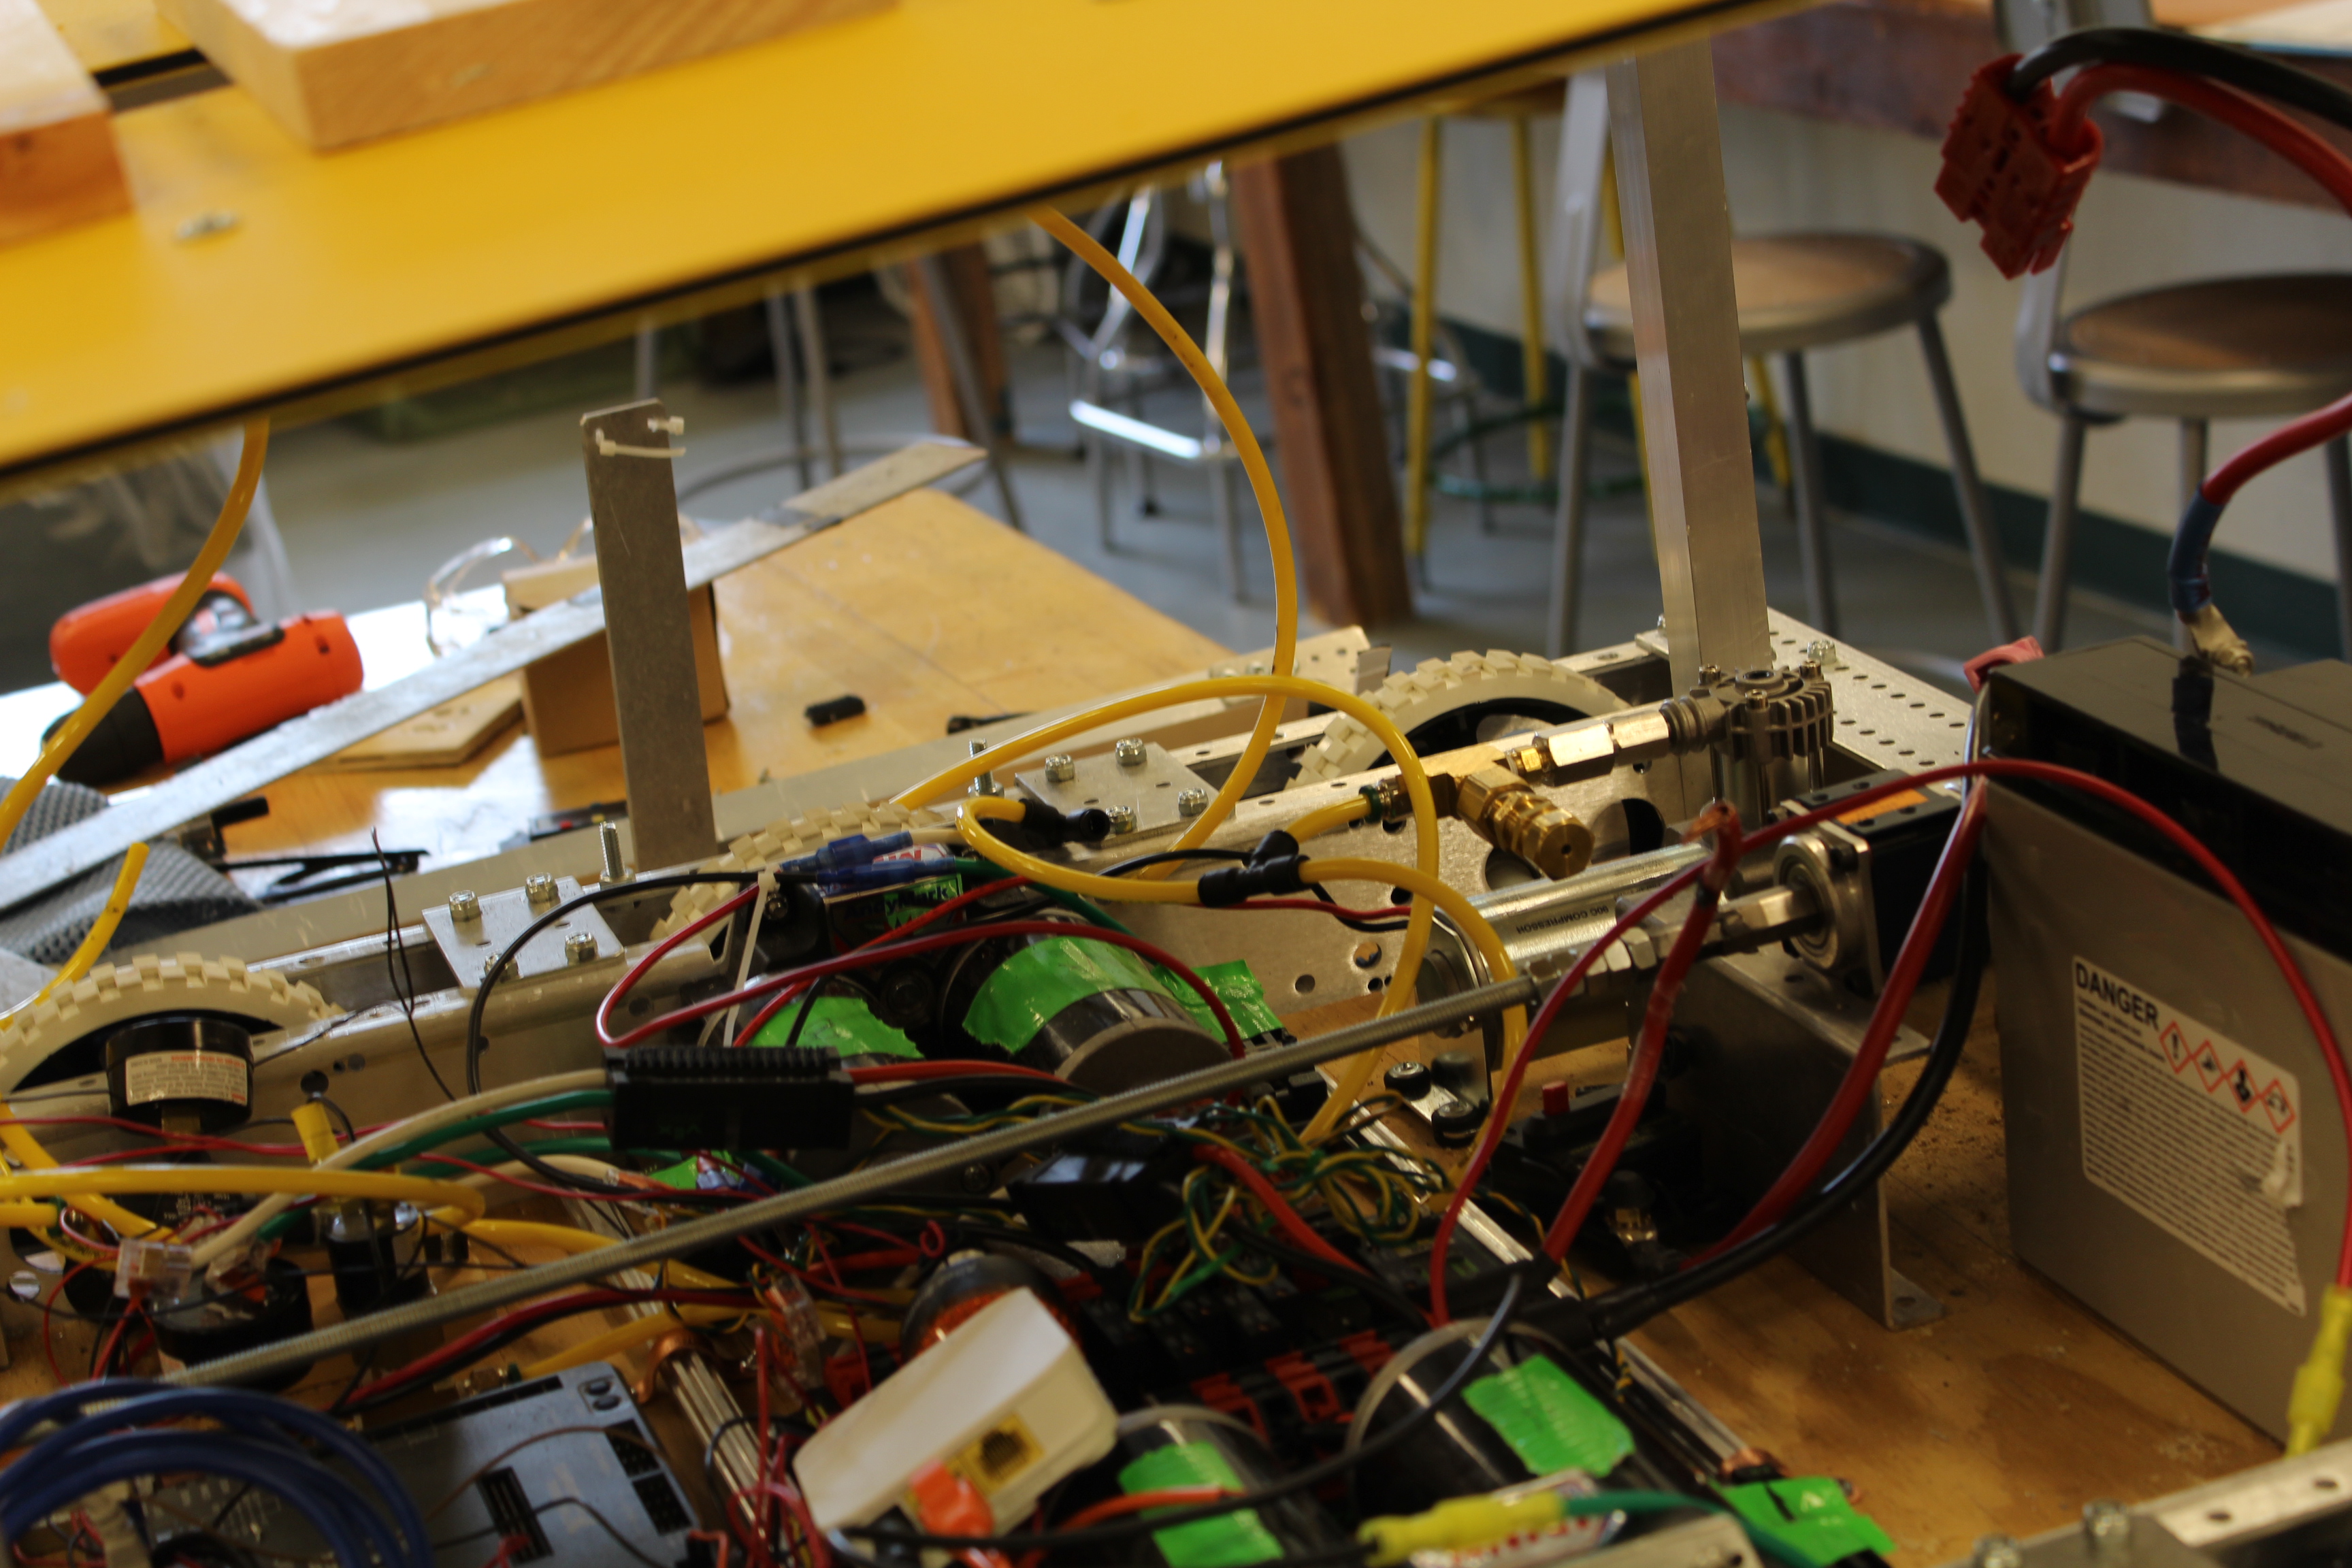 Photo Of The Inner Workings Of The Robot